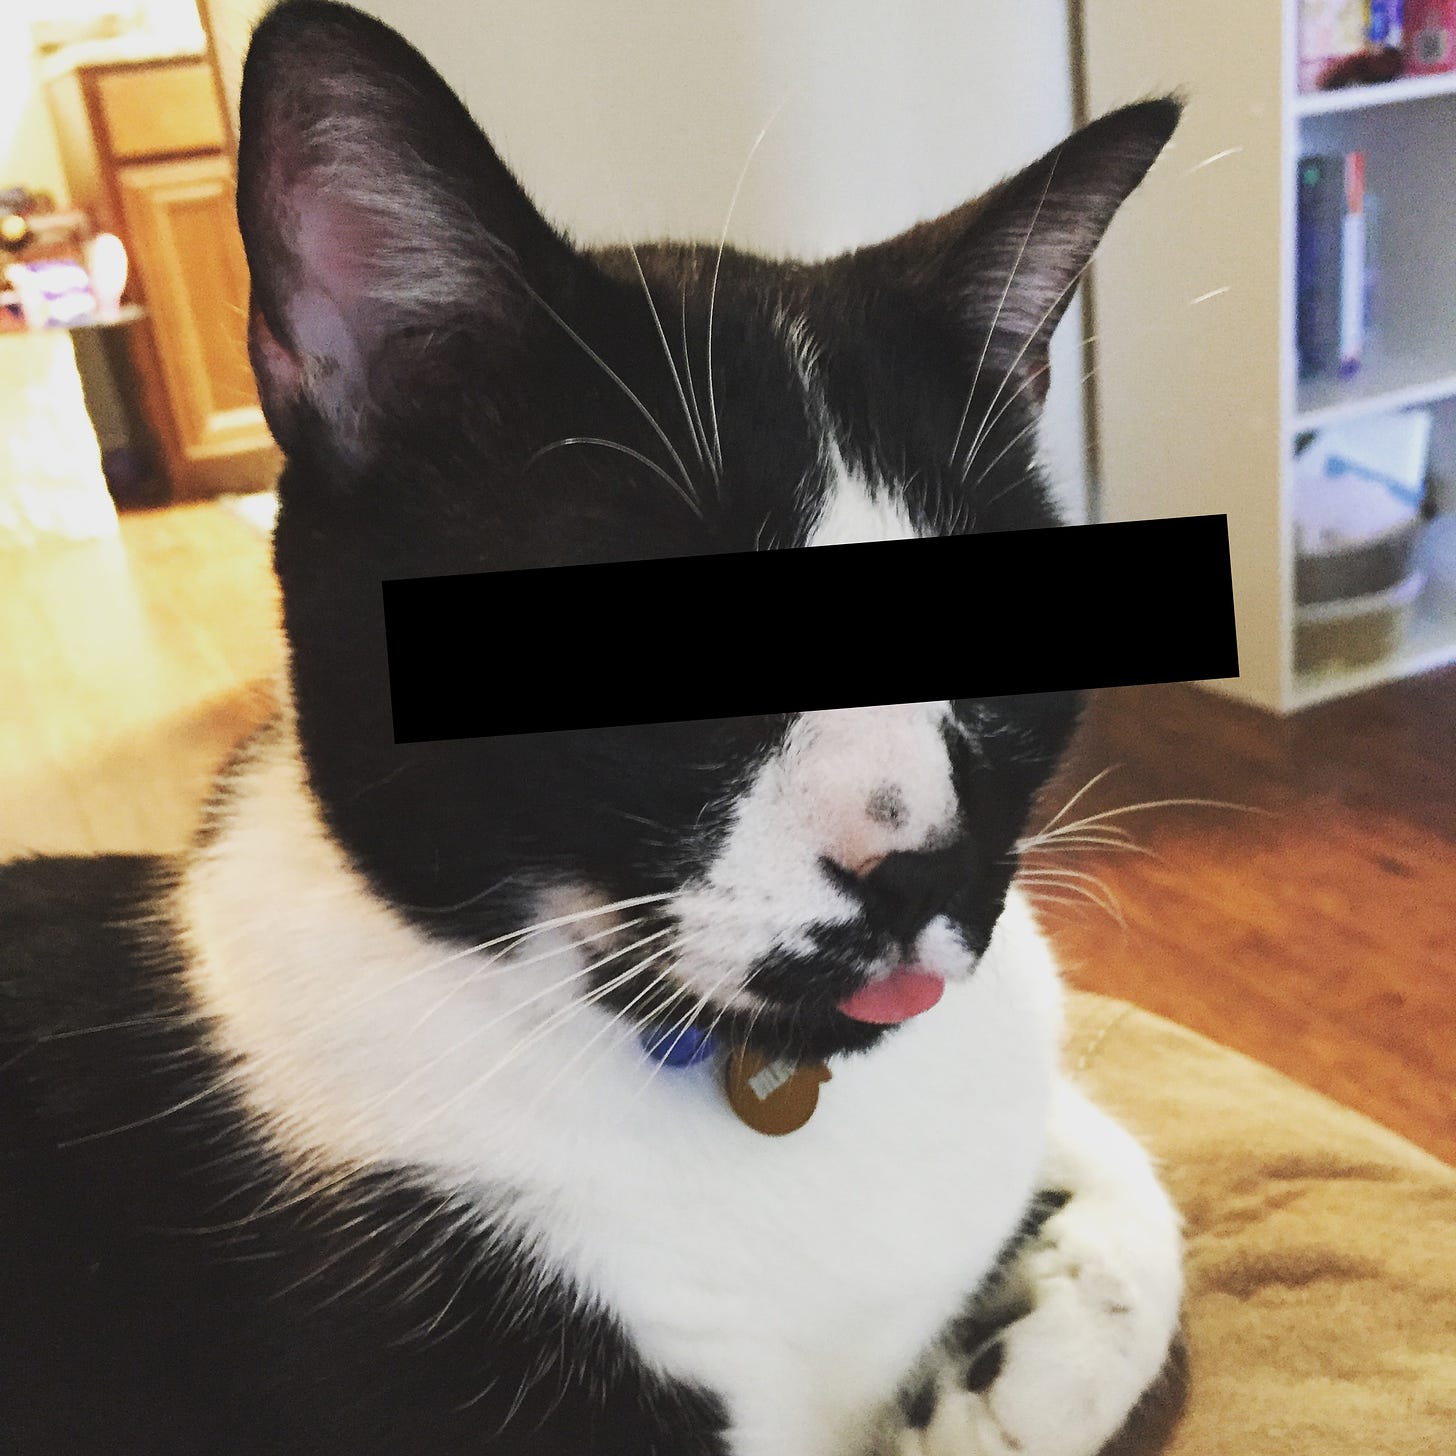 A cat with its tongue out blepping. A black bar covers its eyes. 